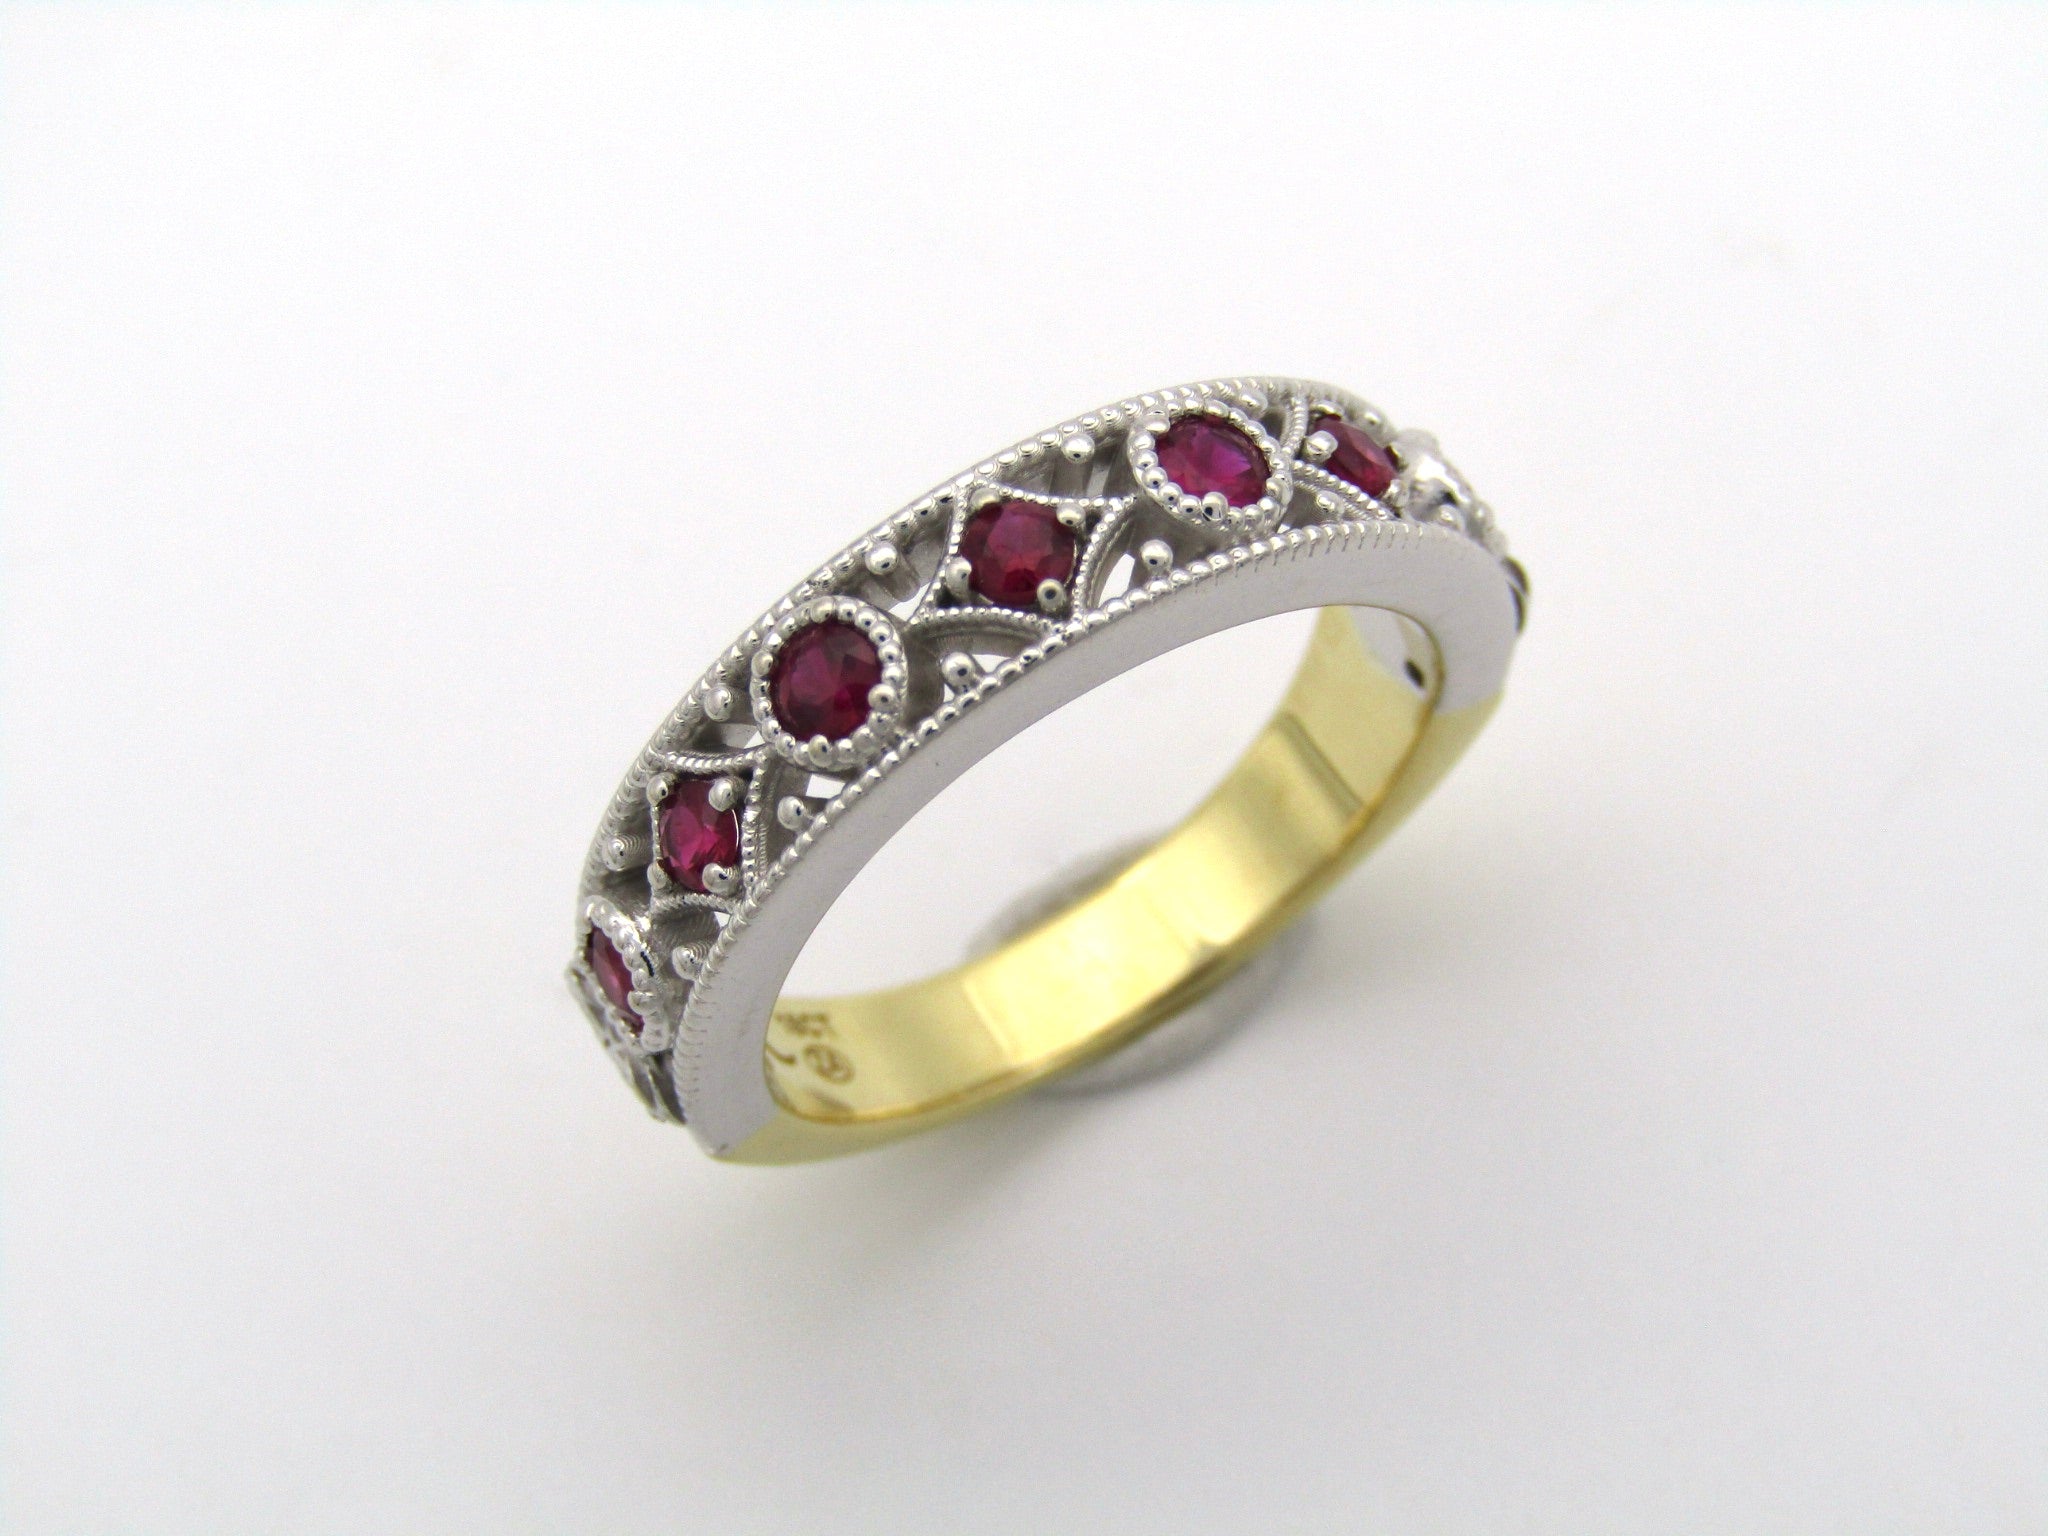 18K gold ruby ring by Jenna Clifford.